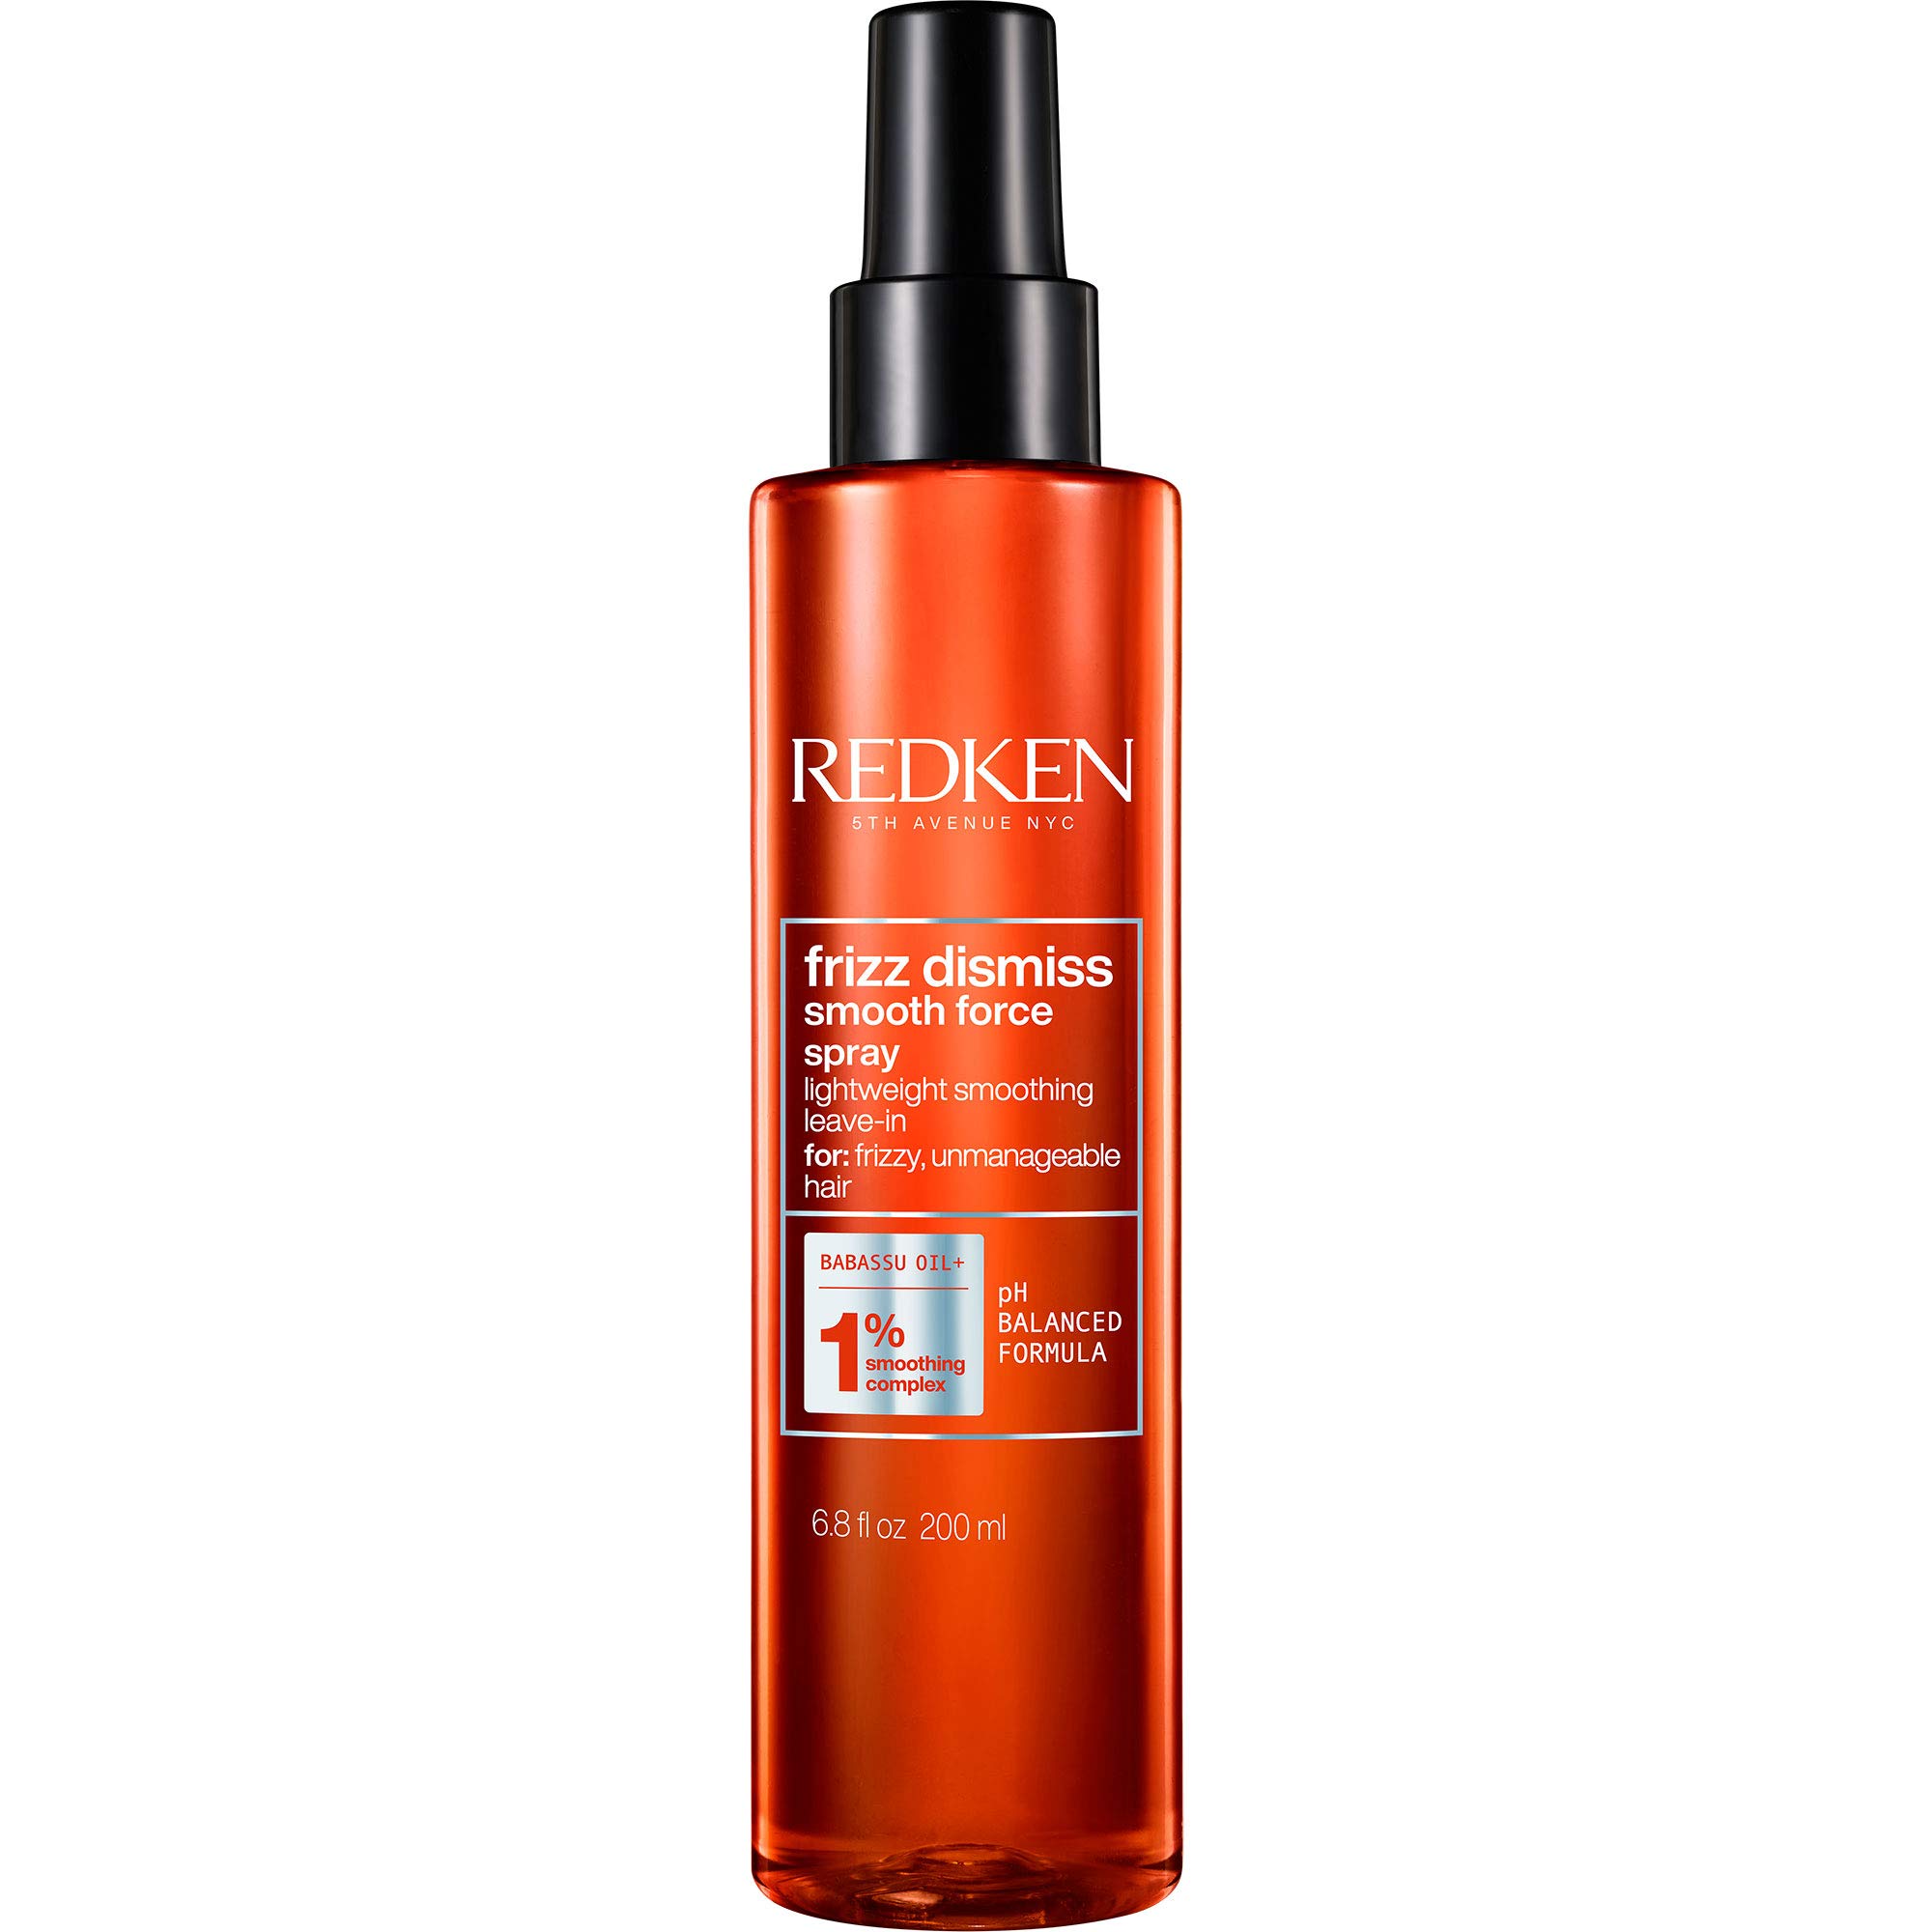 Frizz Dismiss Smooth Force, Hair Smoothing Spray